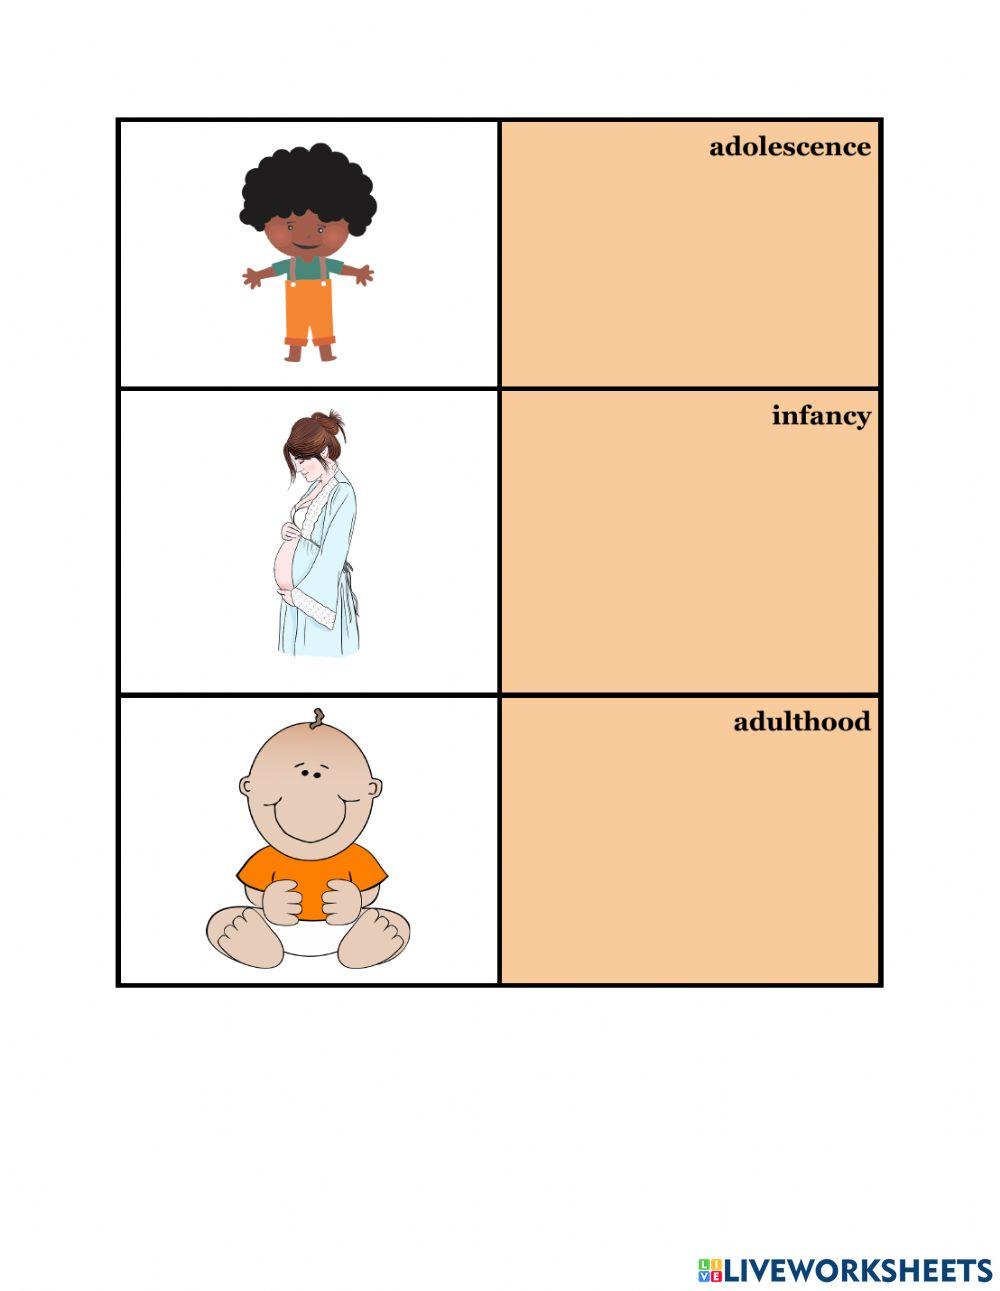 Stages of Human Development Worksheet 2